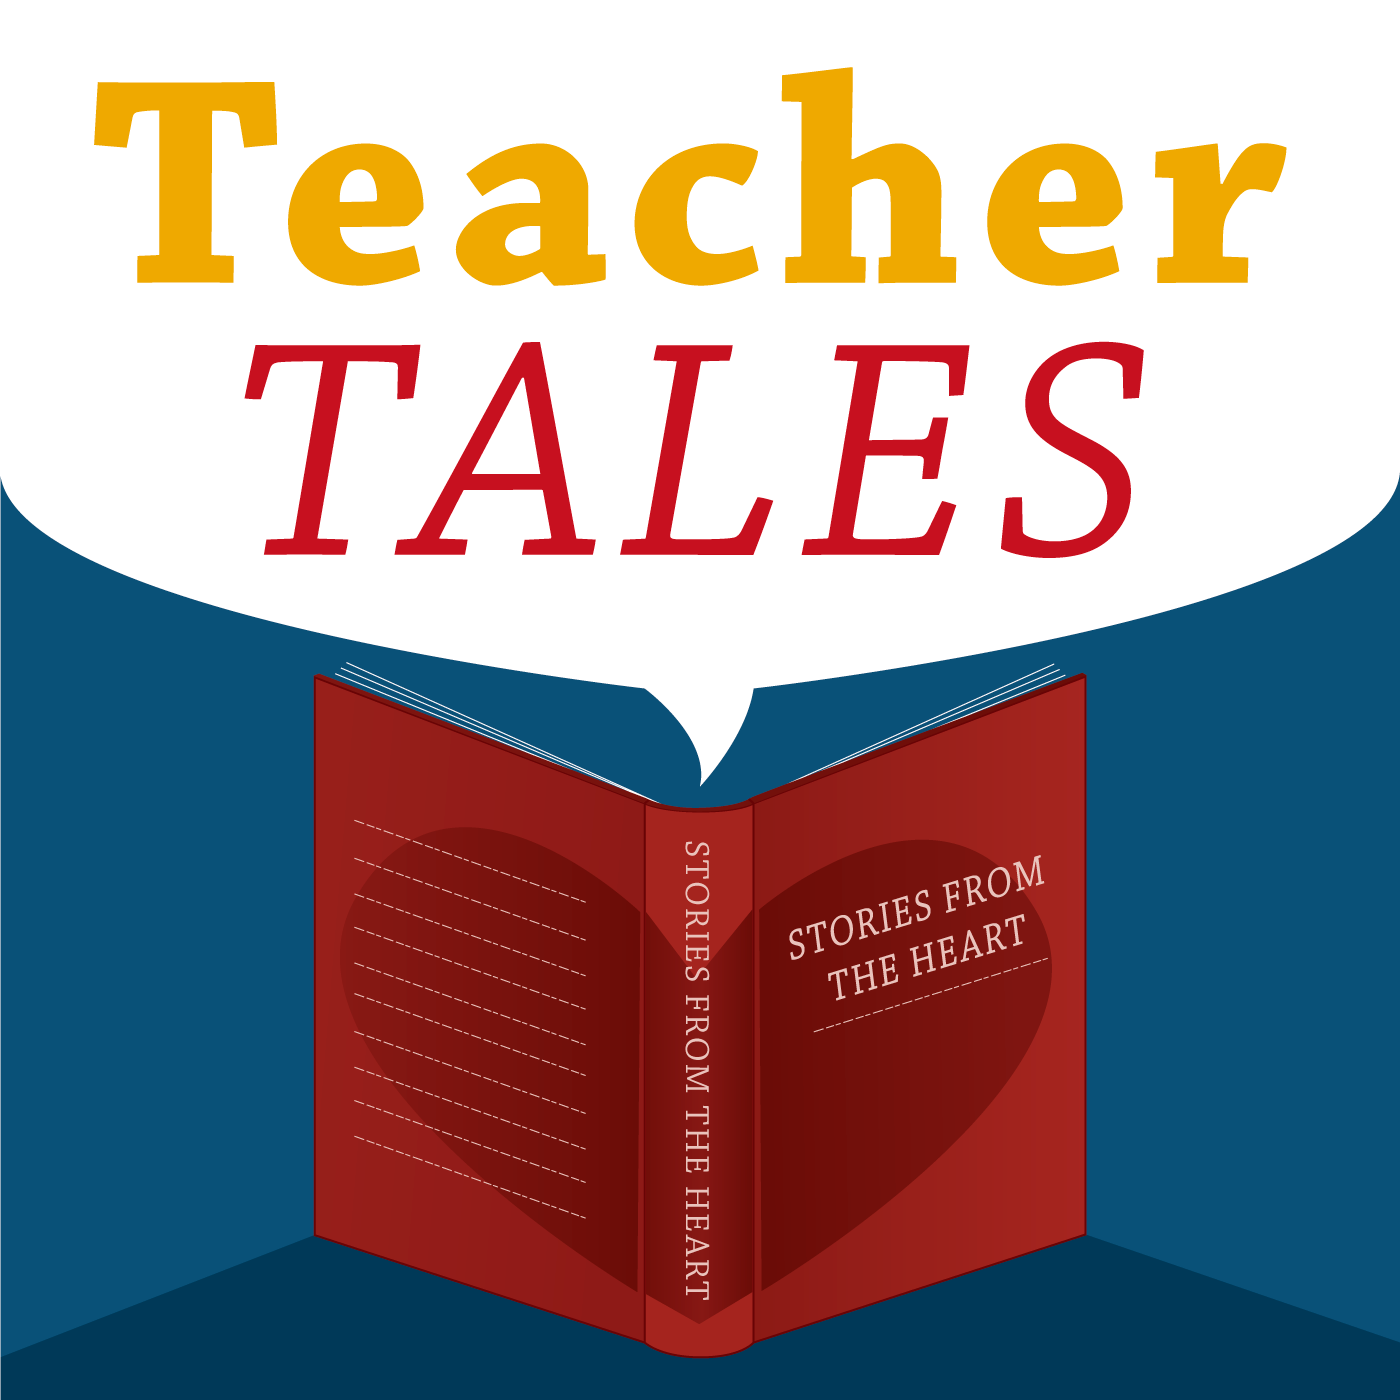 Teacher Tales #45 - Reaching students, creating stories and setting pathways: Grant, college professor, PD podcaster and one who helps shape our profession